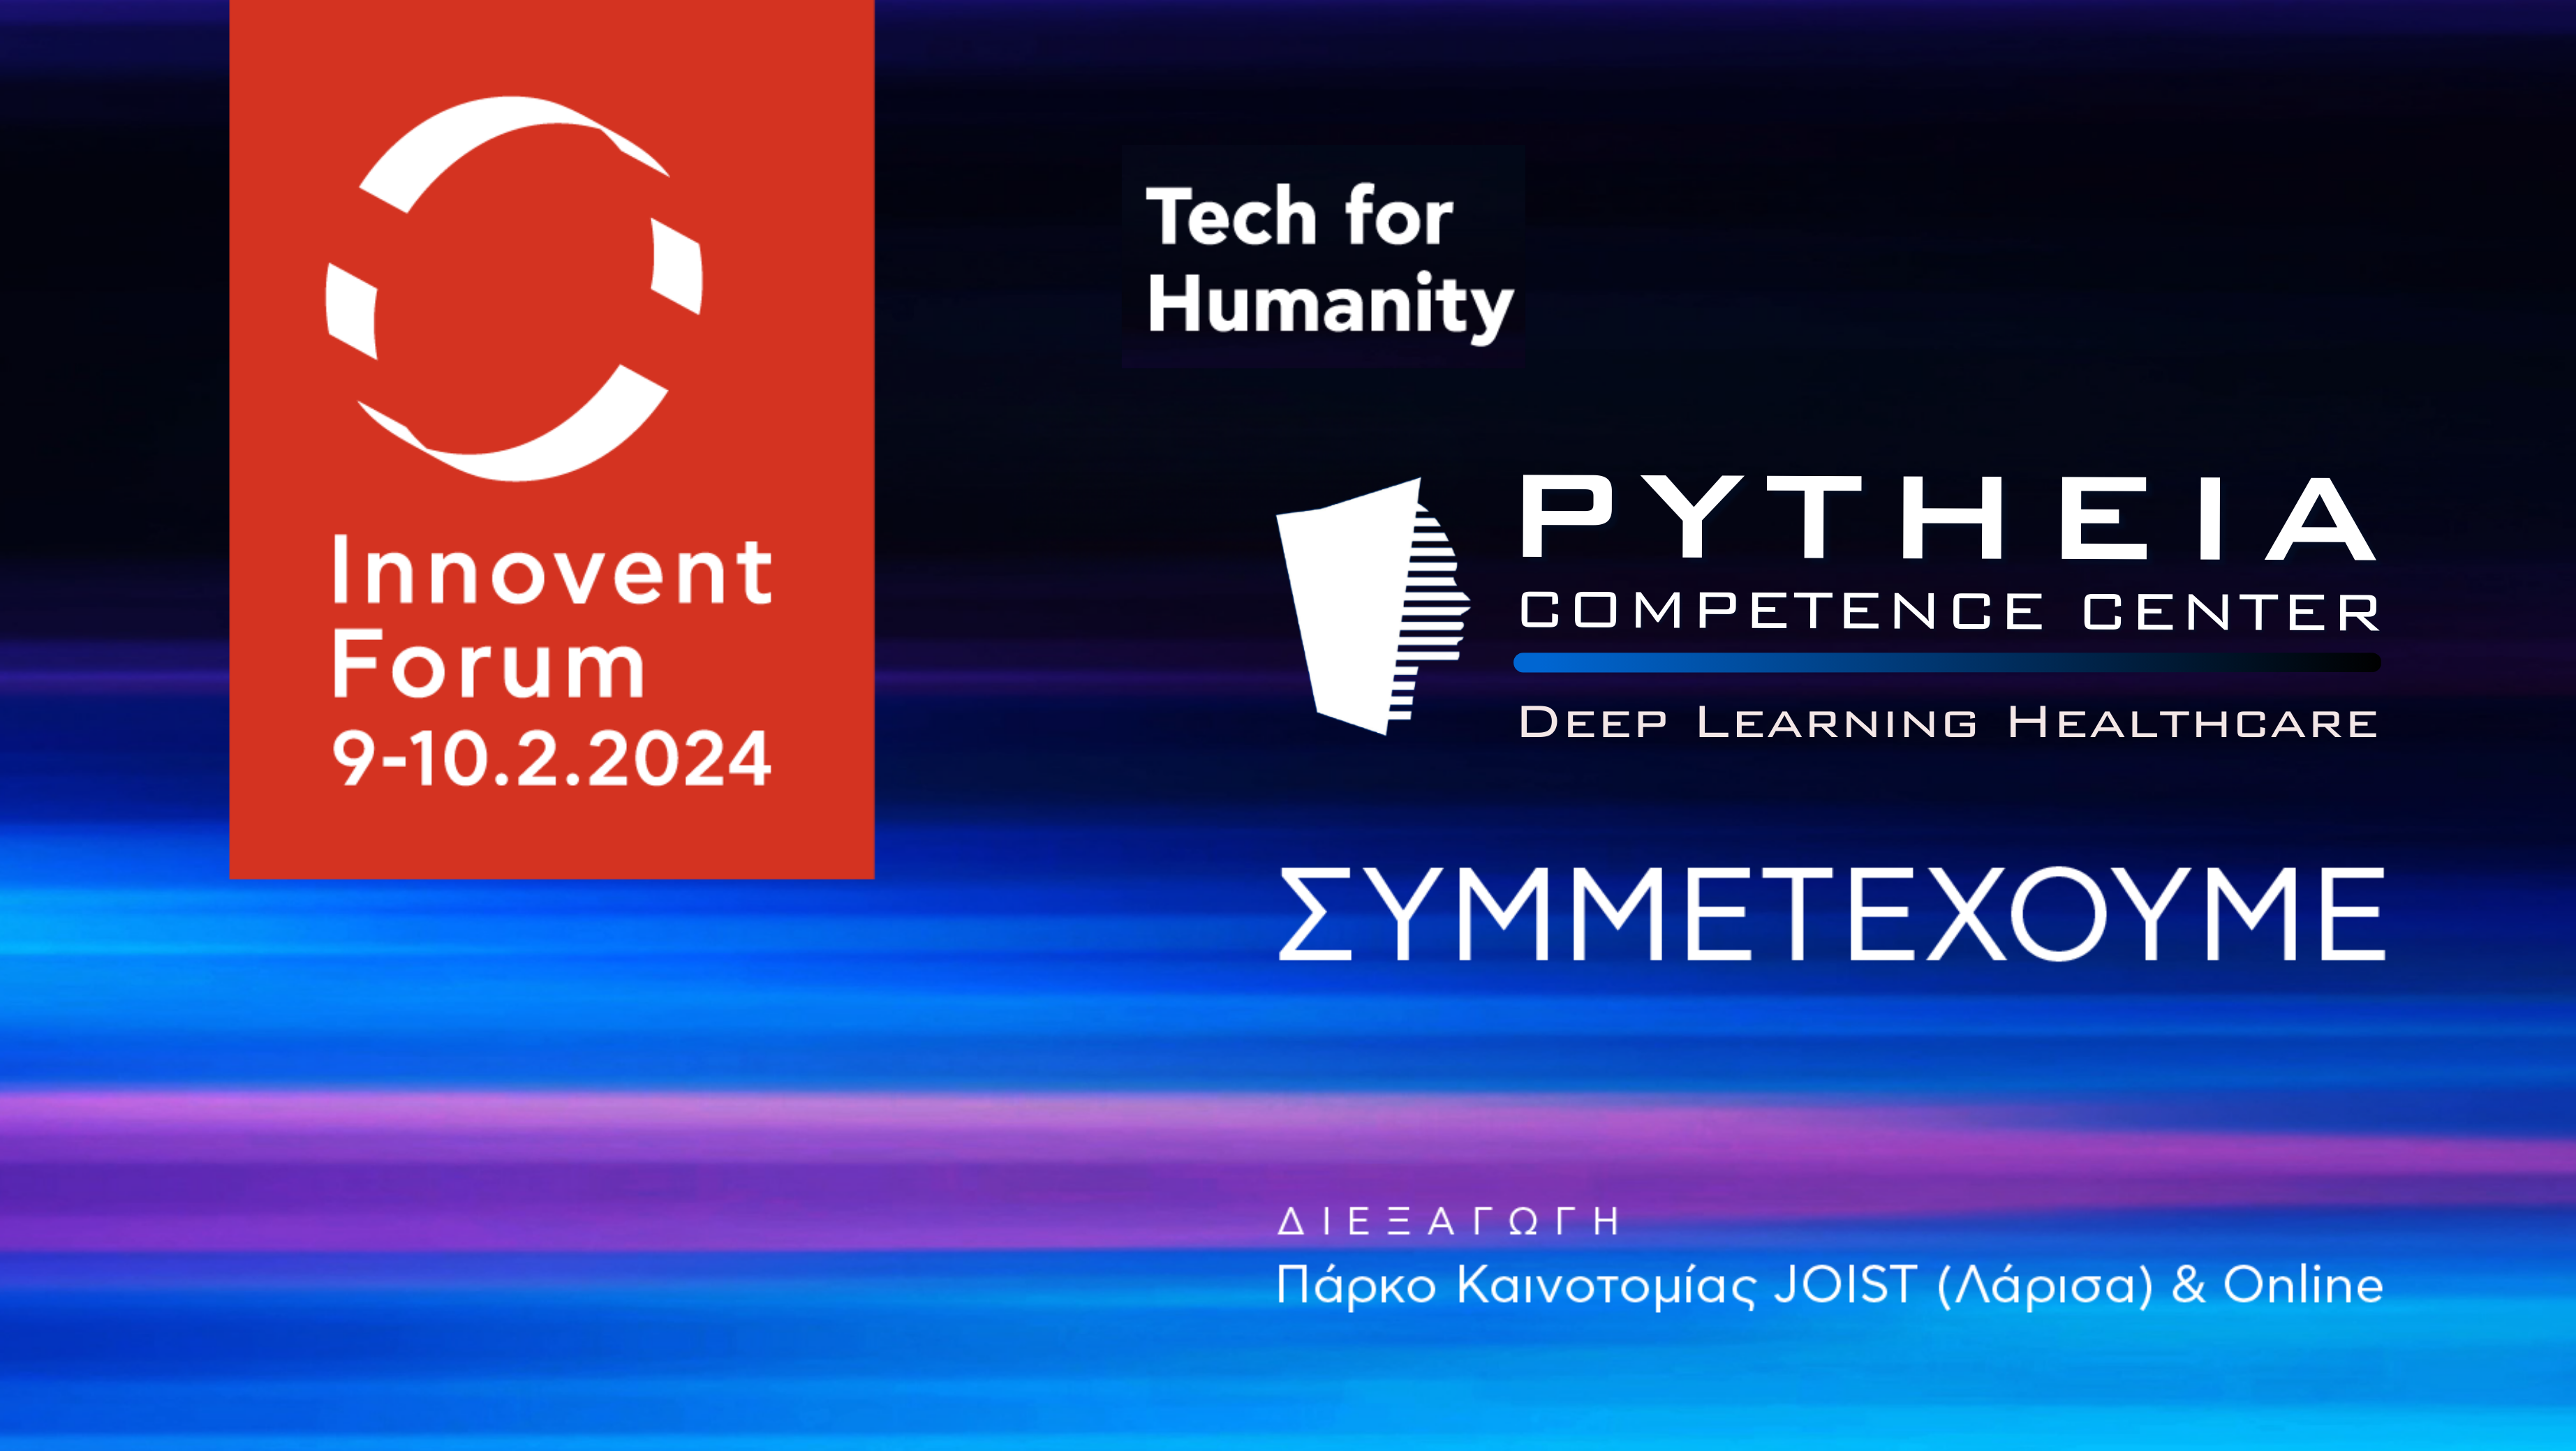 Deep Learning Healthcare: Pytheia Competence Center at Innovent Forum 2024